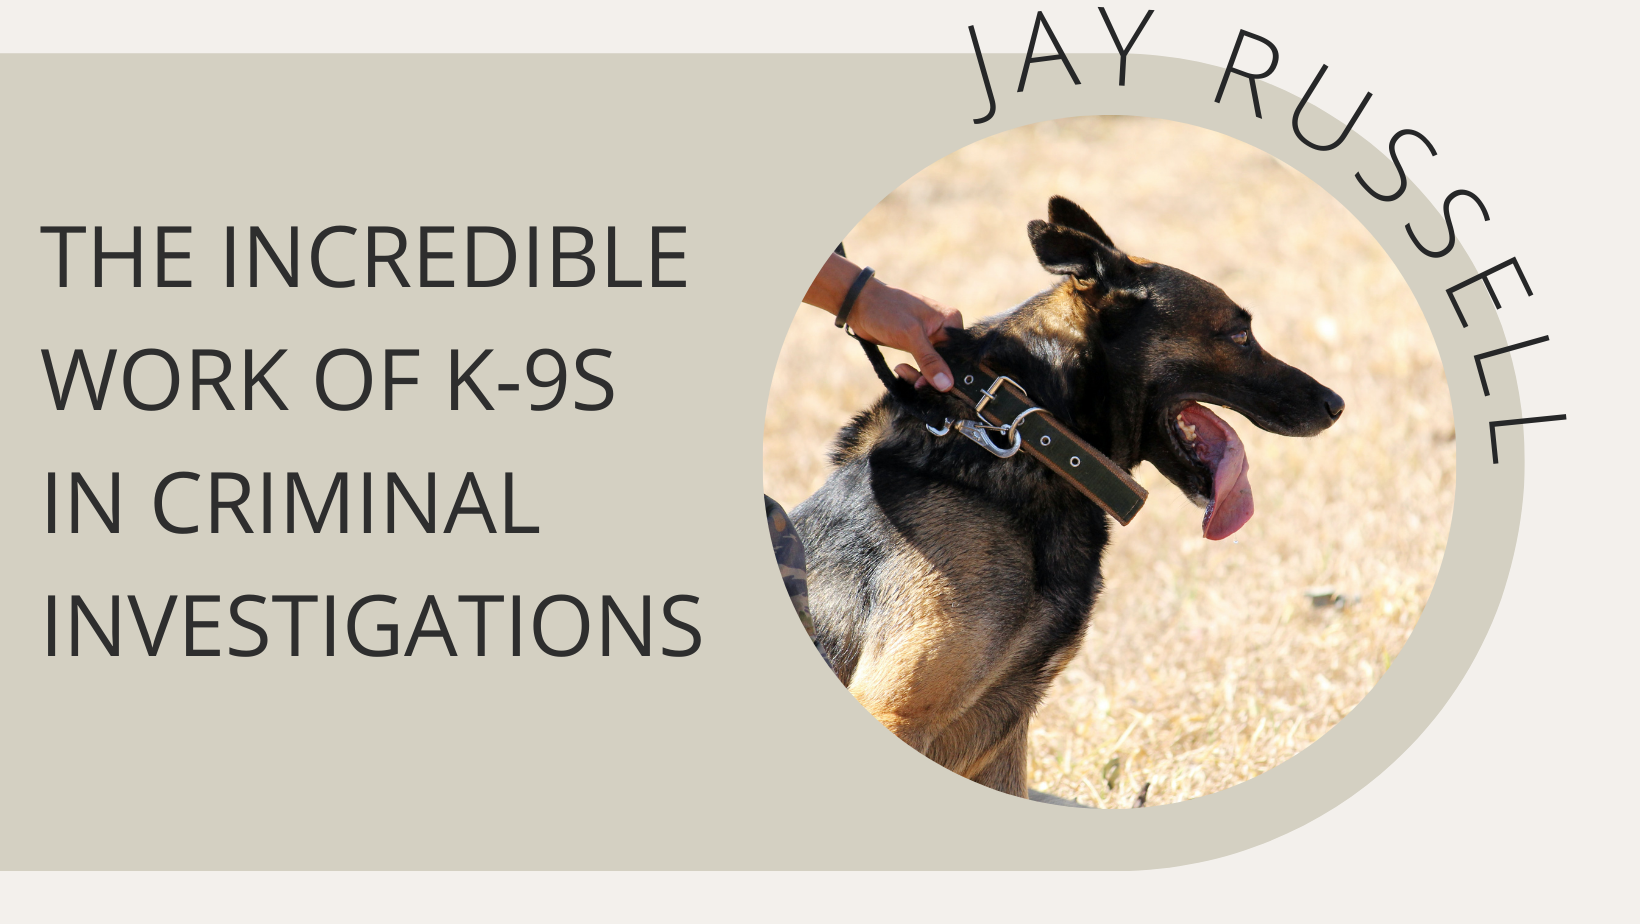 The Incredible Work of K-9s in Criminal Investigations